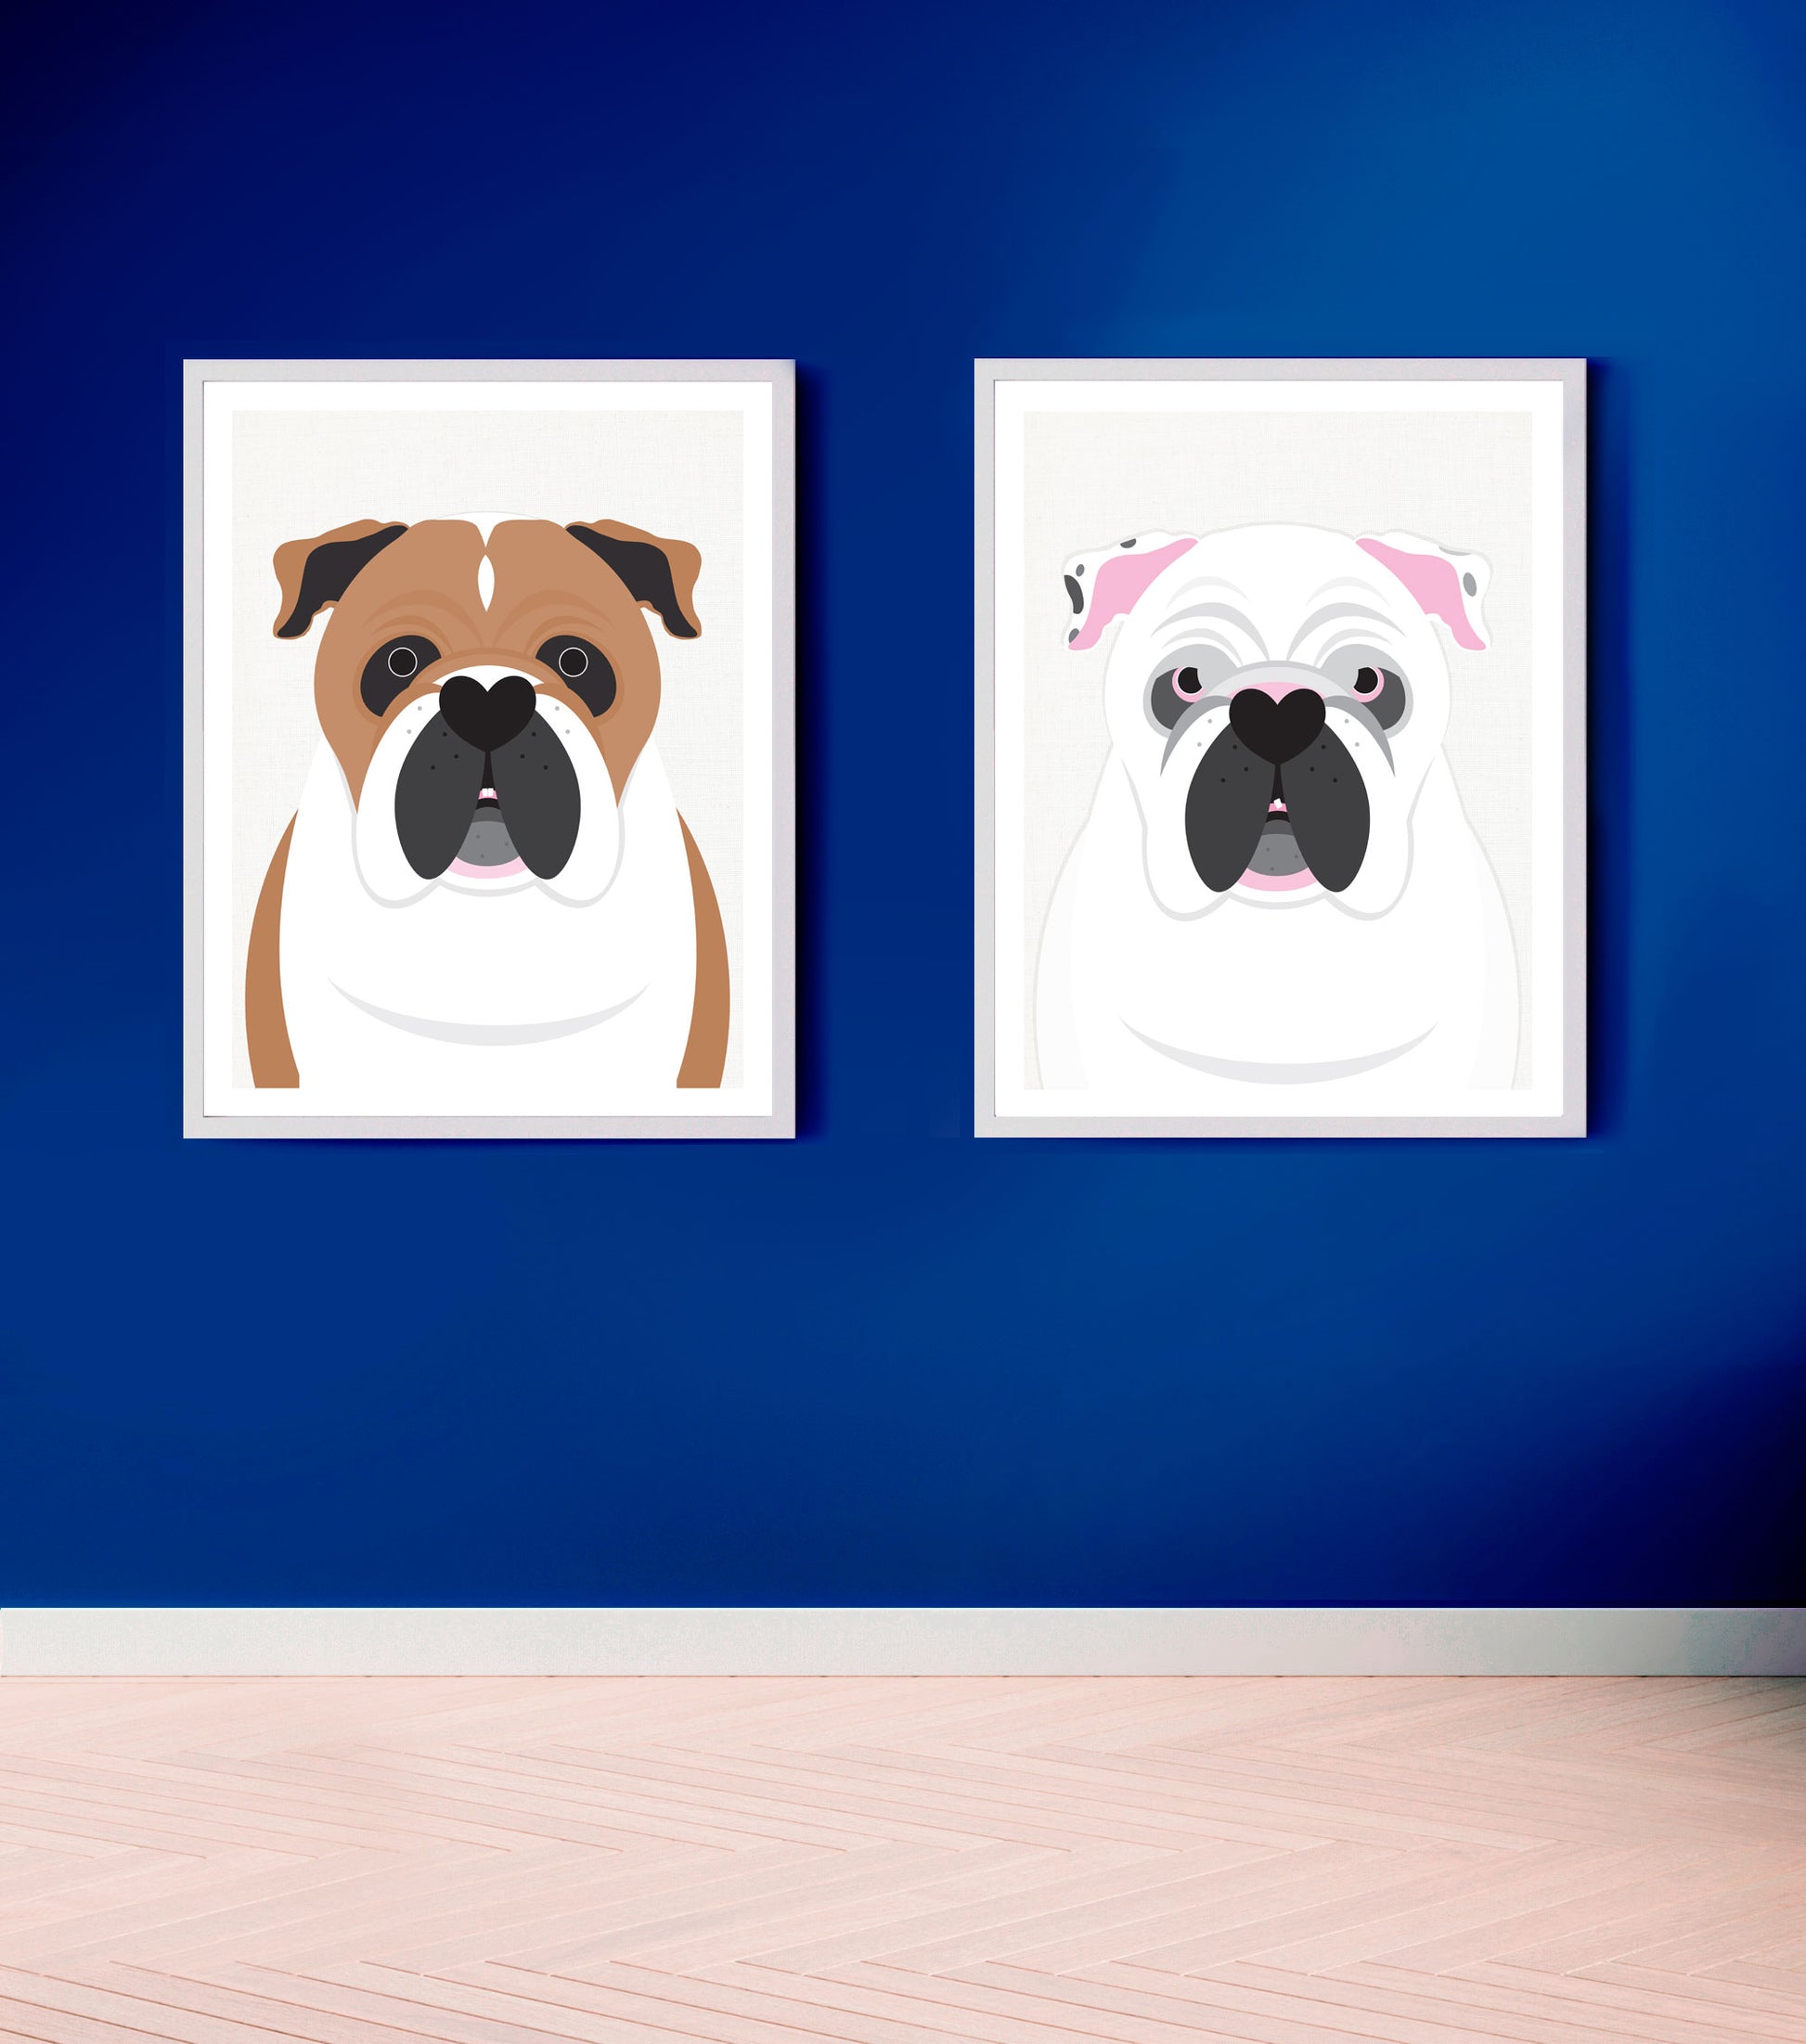 English bulldog prints with white dog or red and white dog in blue room